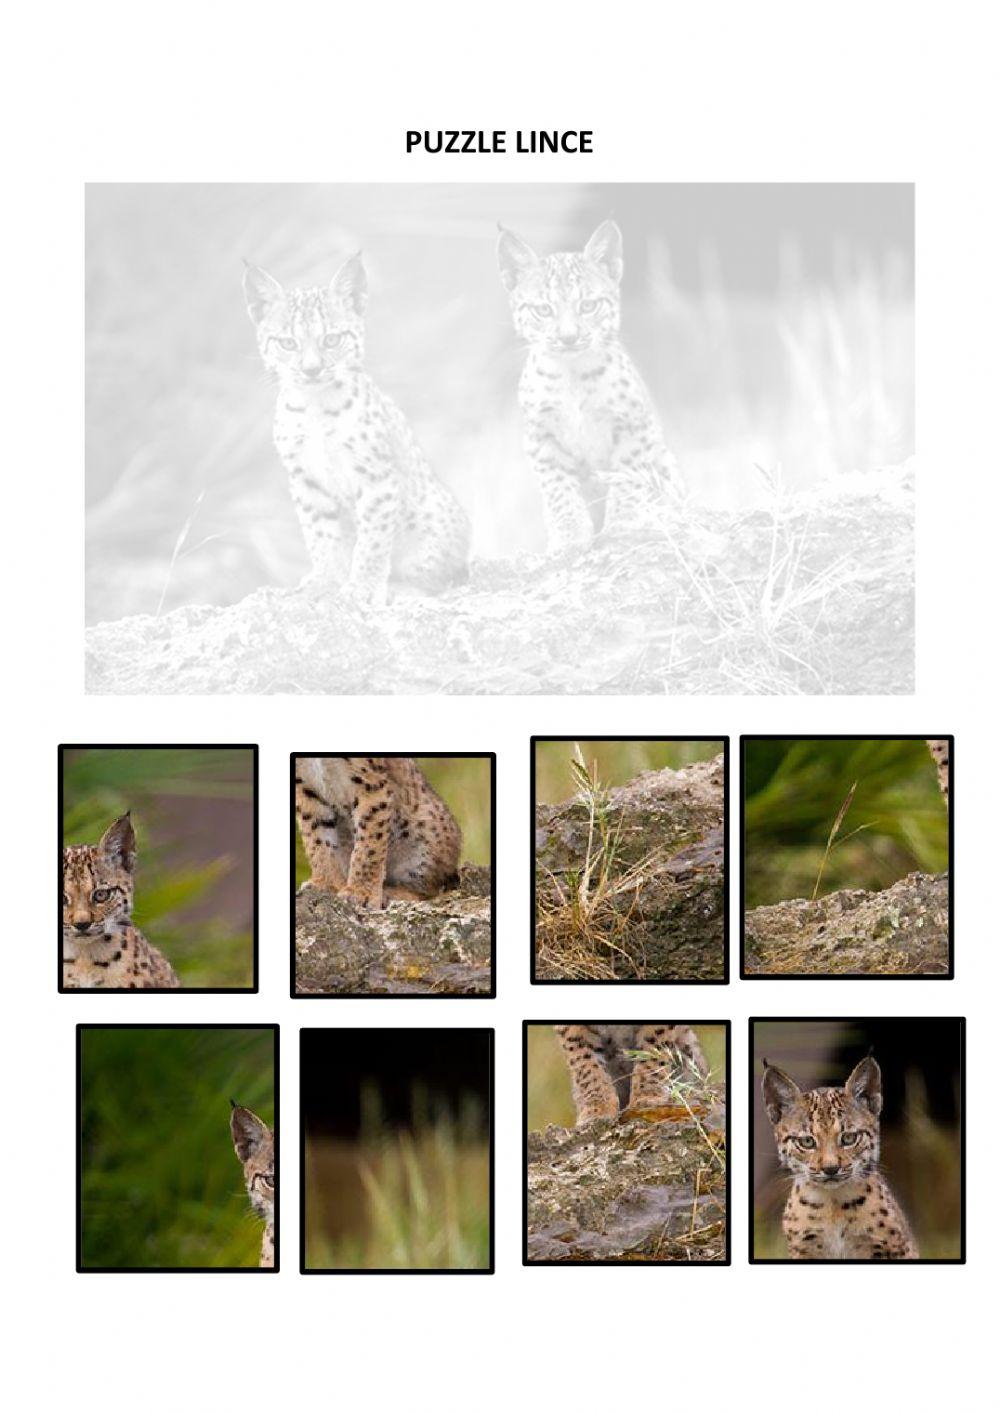 Puzzle lince